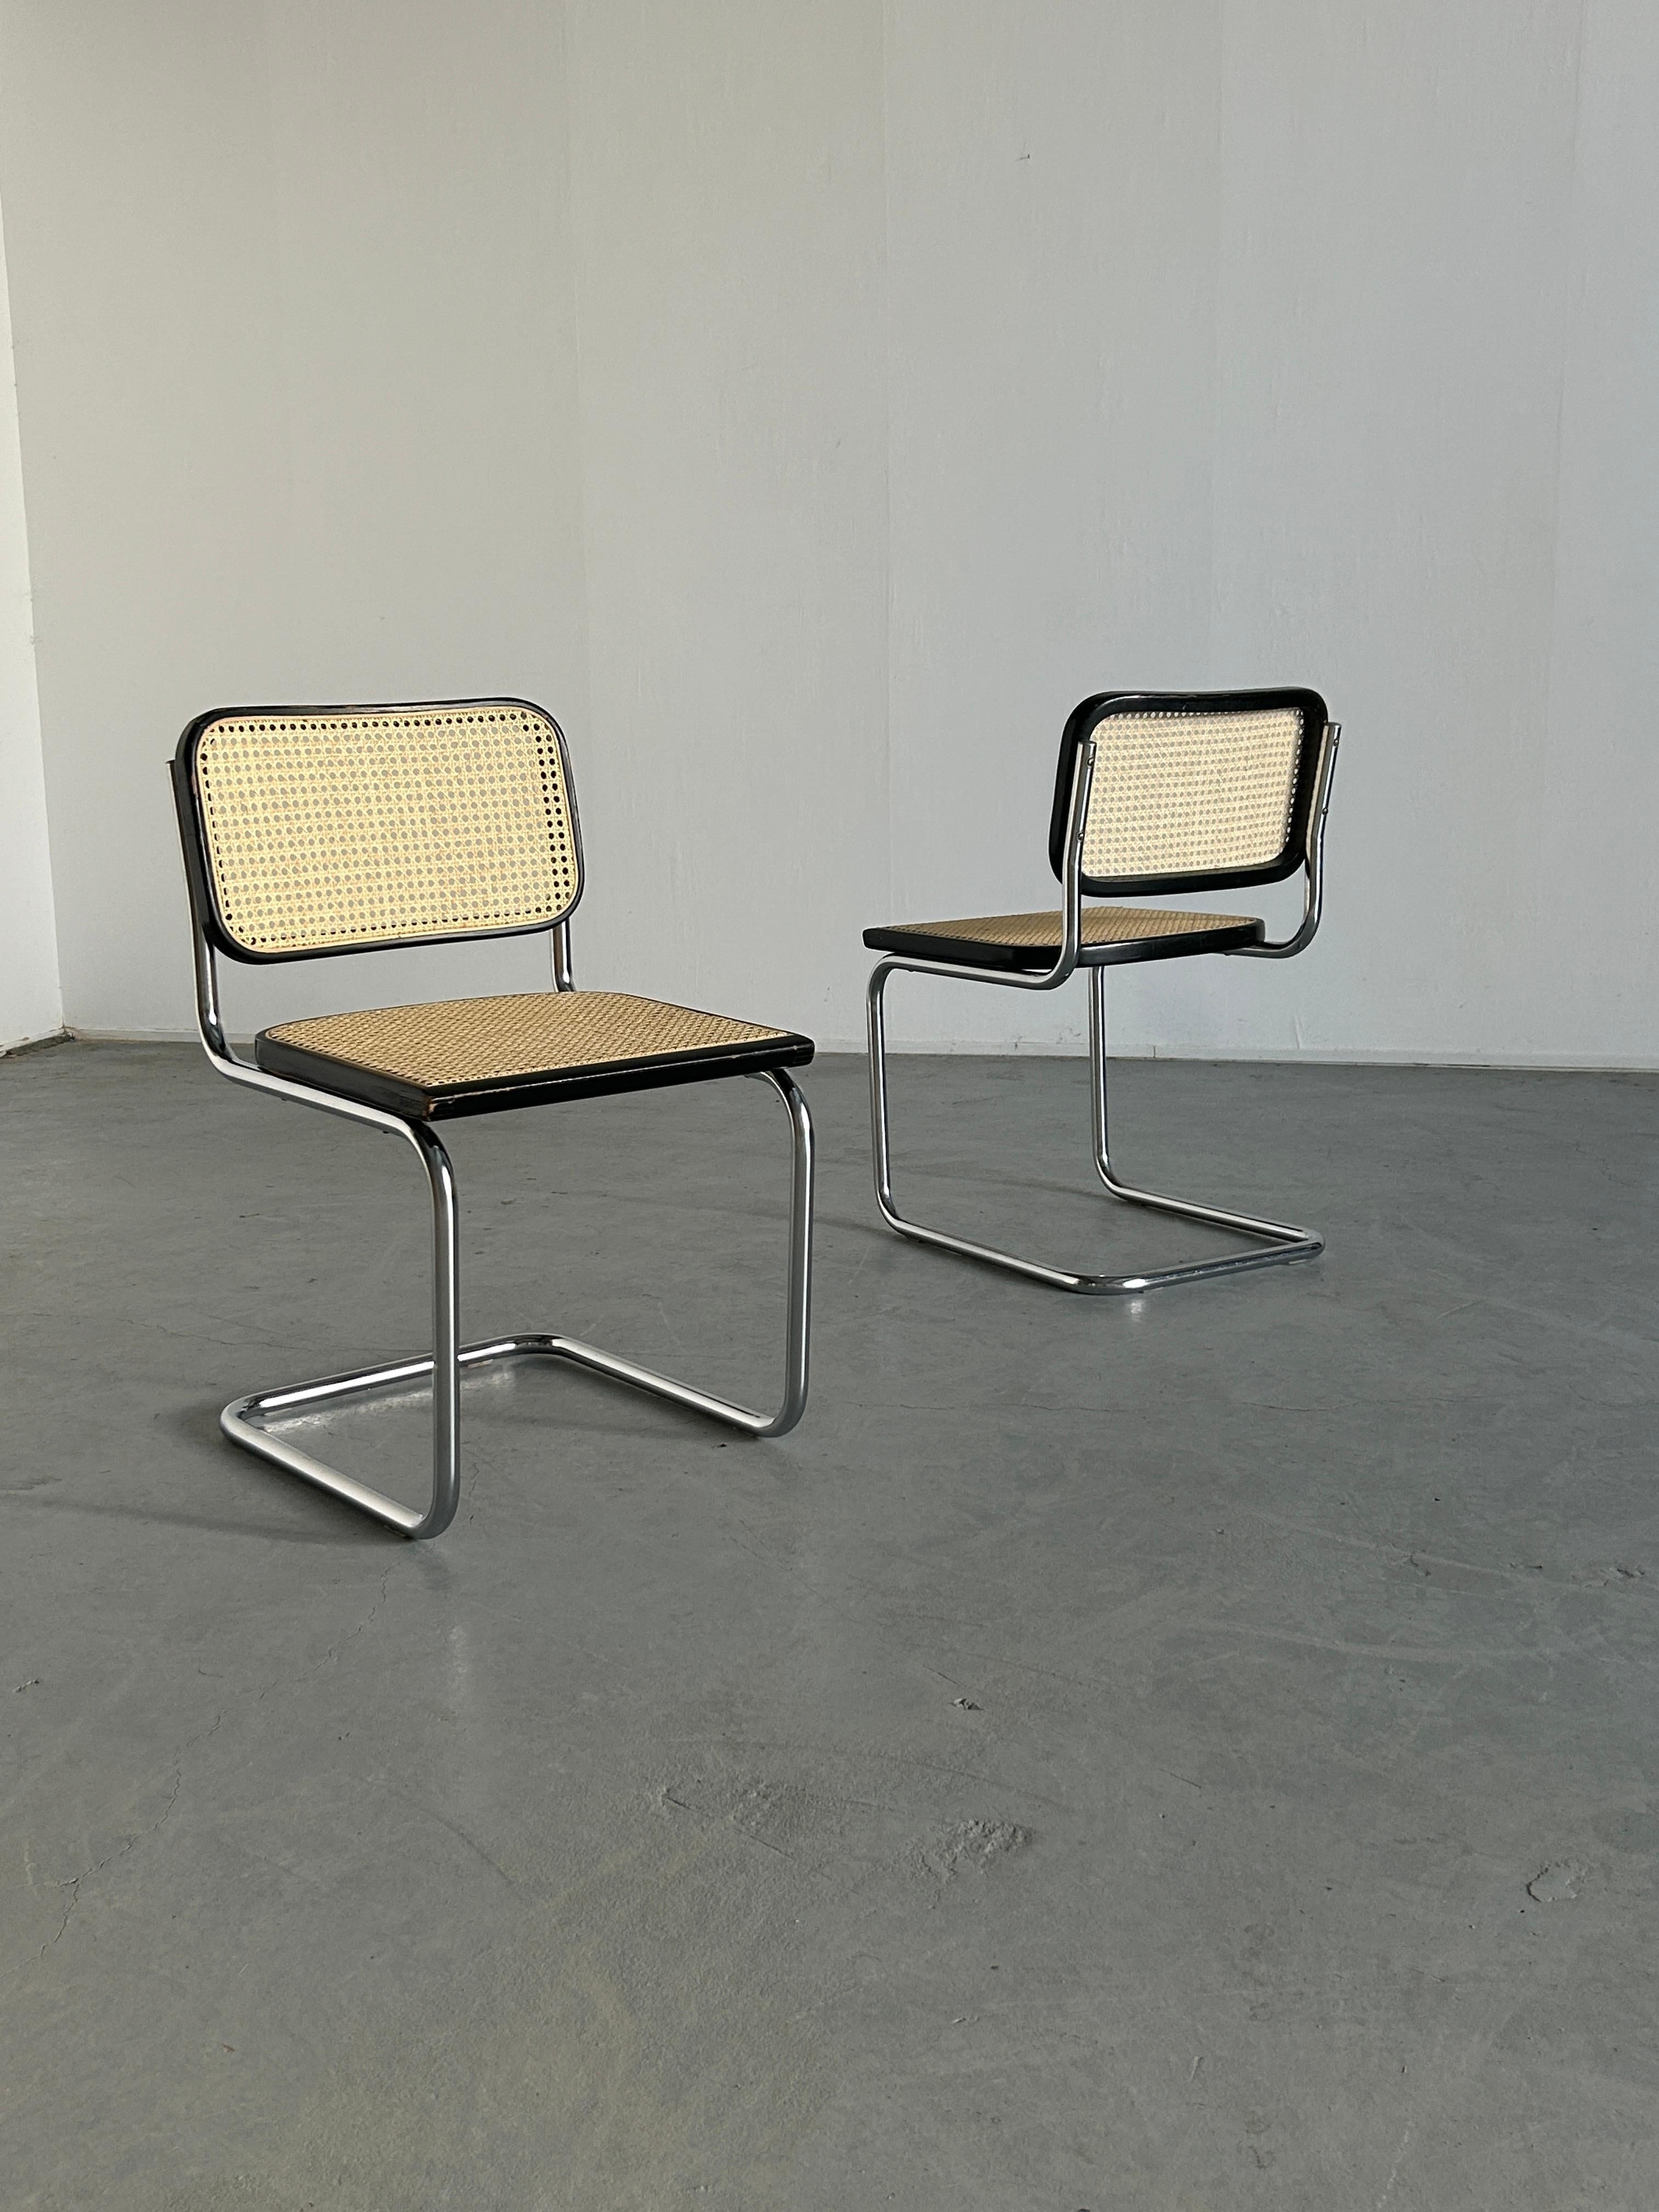 Pair of Vintage Cesca Mid Century Italian Cantilever Chairs, Thonet Mundus In Good Condition For Sale In Zagreb, HR